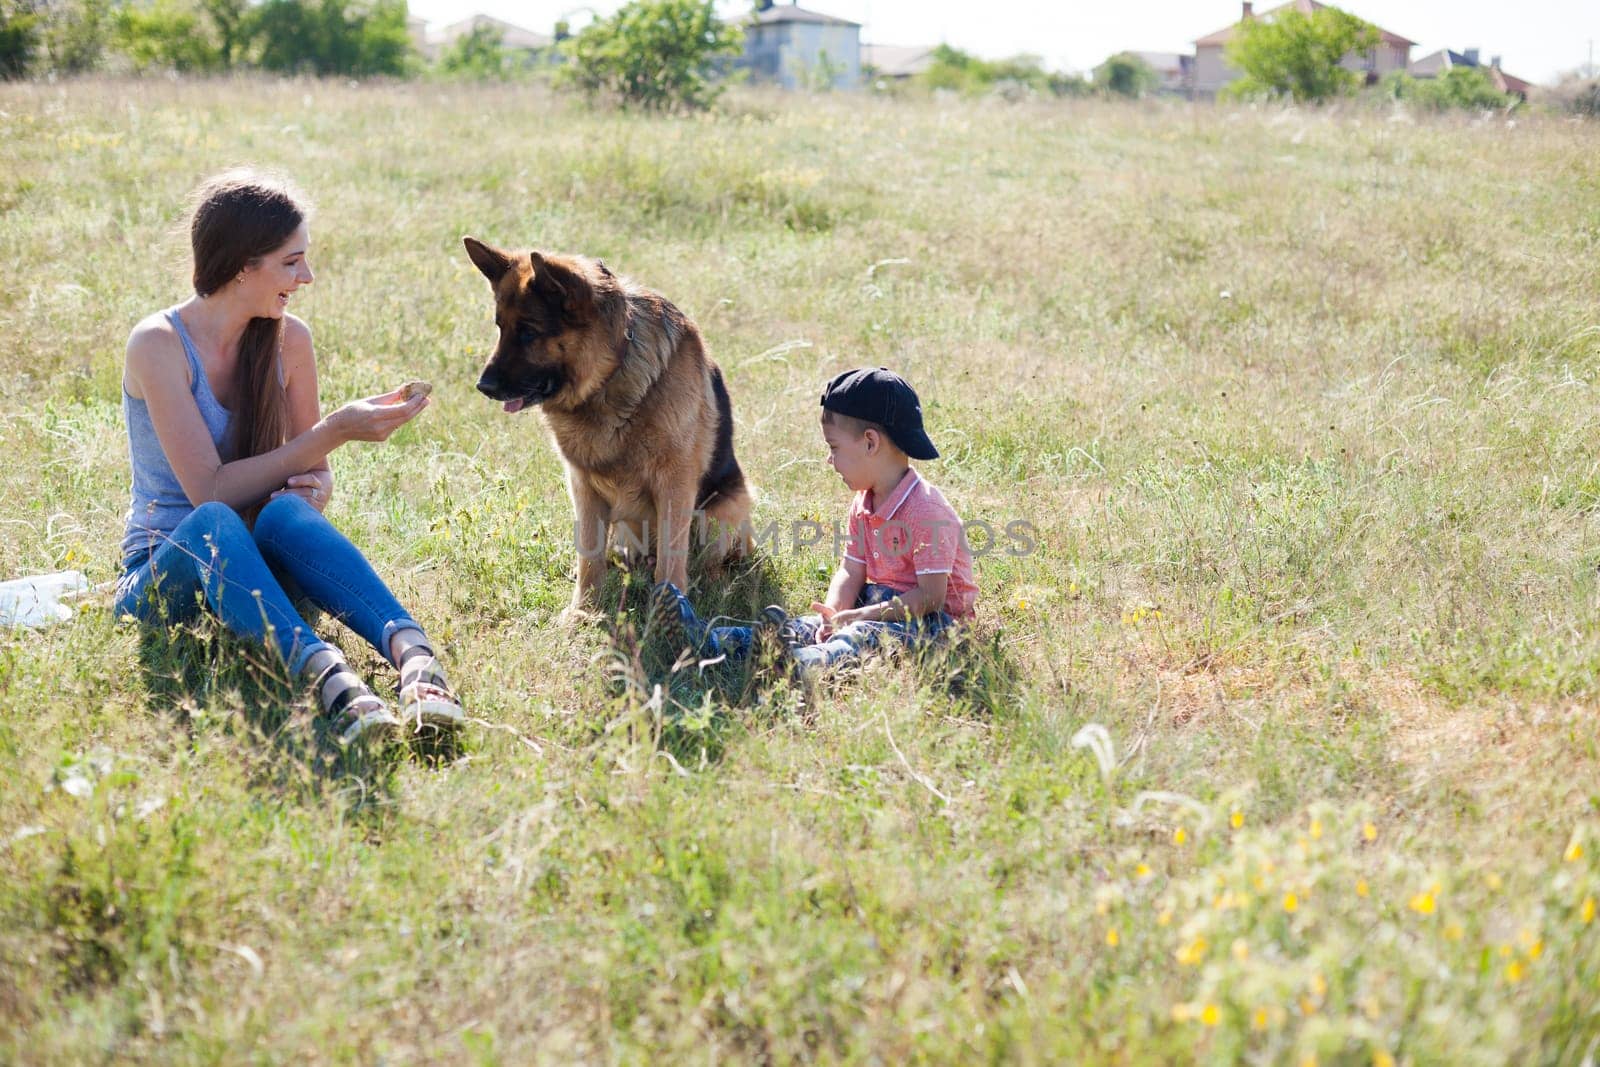 Mom and young son play with dog on walk in the park by Simakov